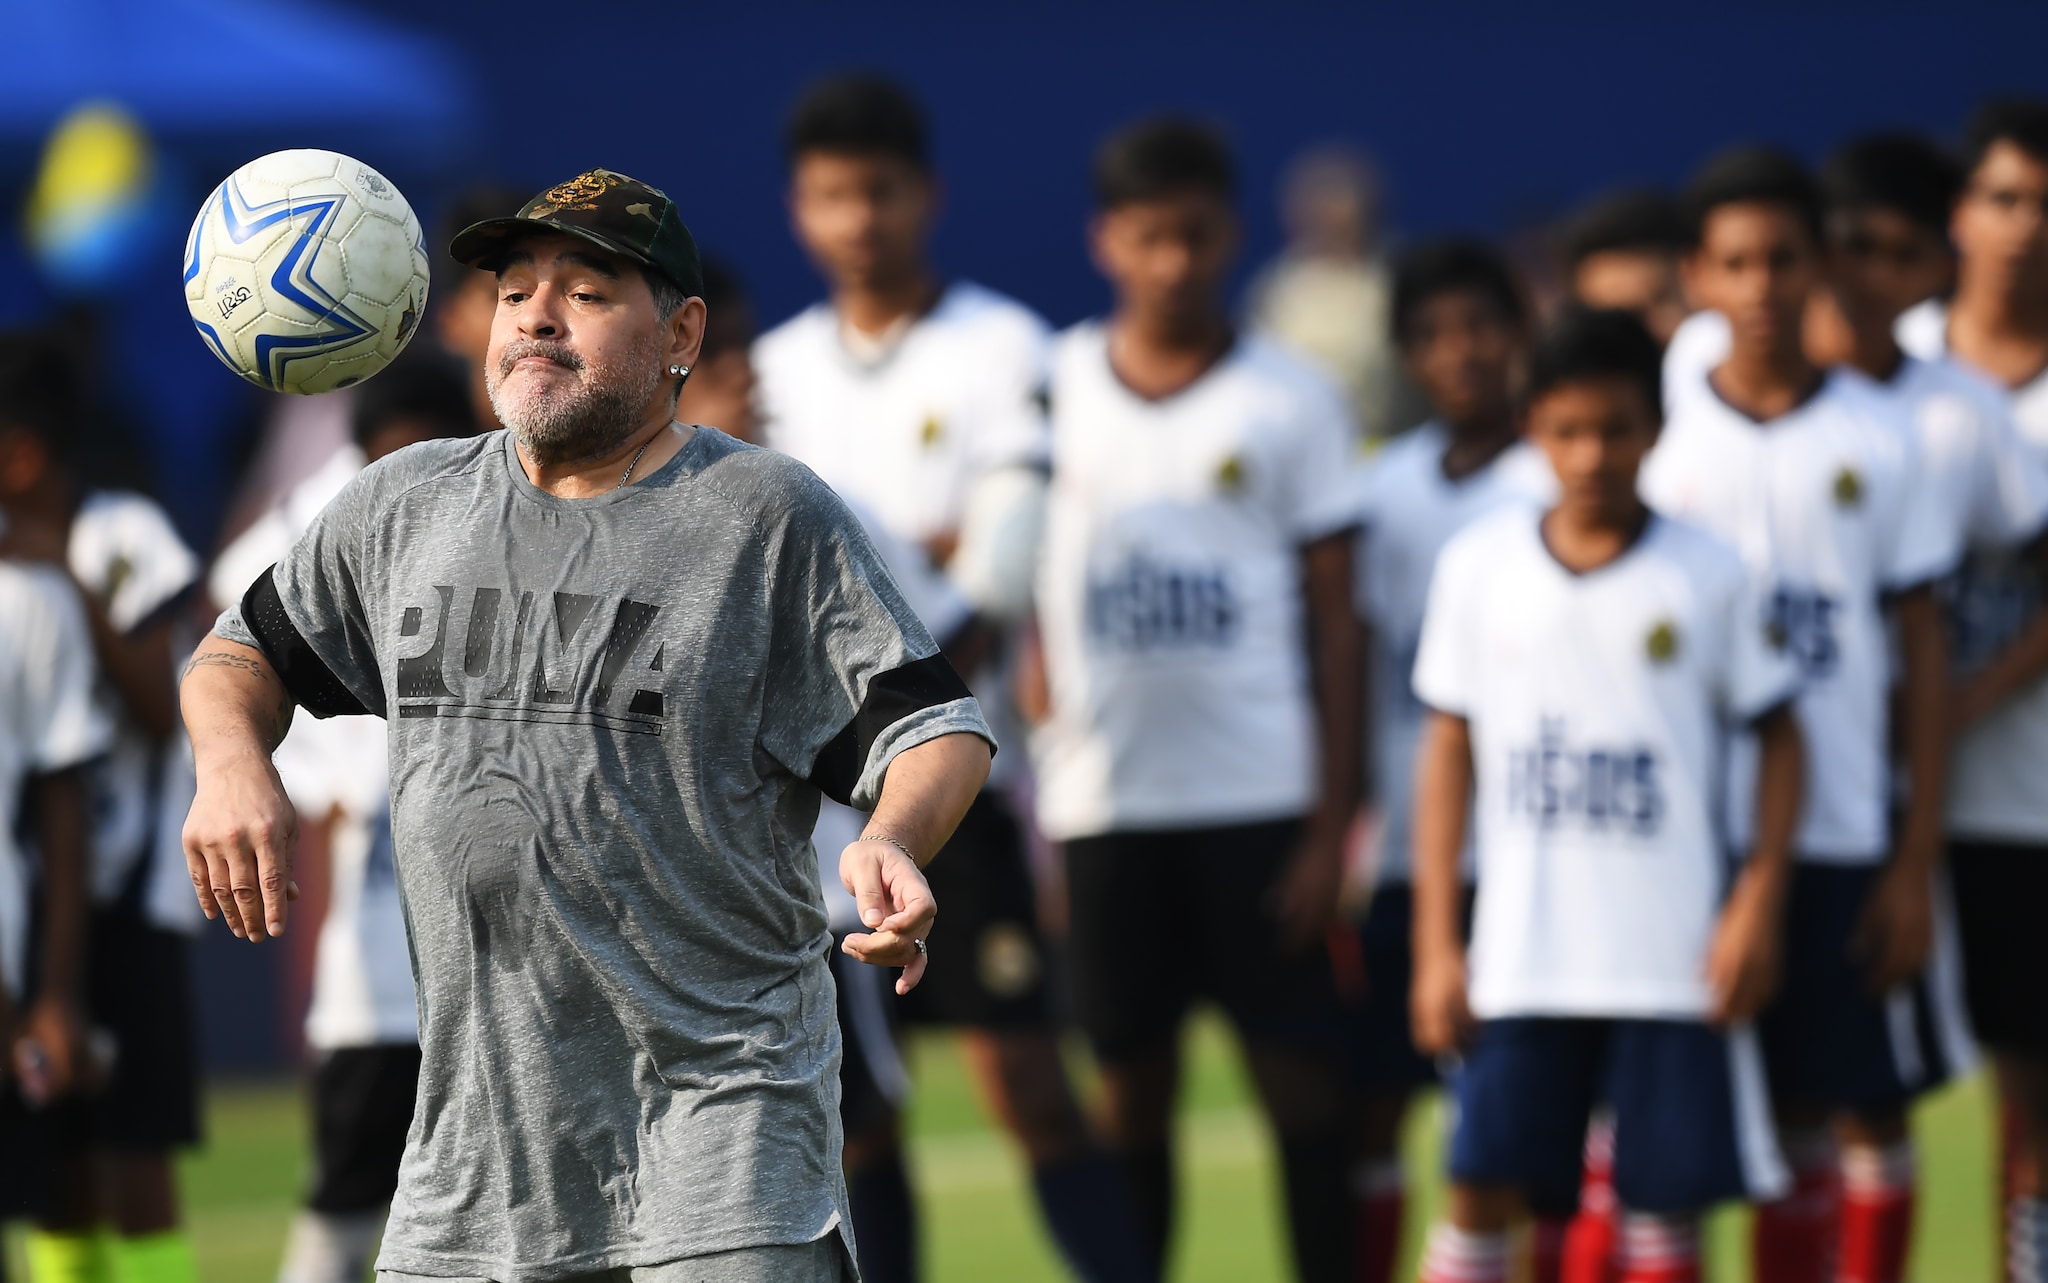  Argentine footballer Diego Maradona (L) plays the ball during a football workshop with school students in Barasat, around 35 Km north of Kolkata on December 12, 2017. - Maradona is on a private visit to India. (Photo: AFP)